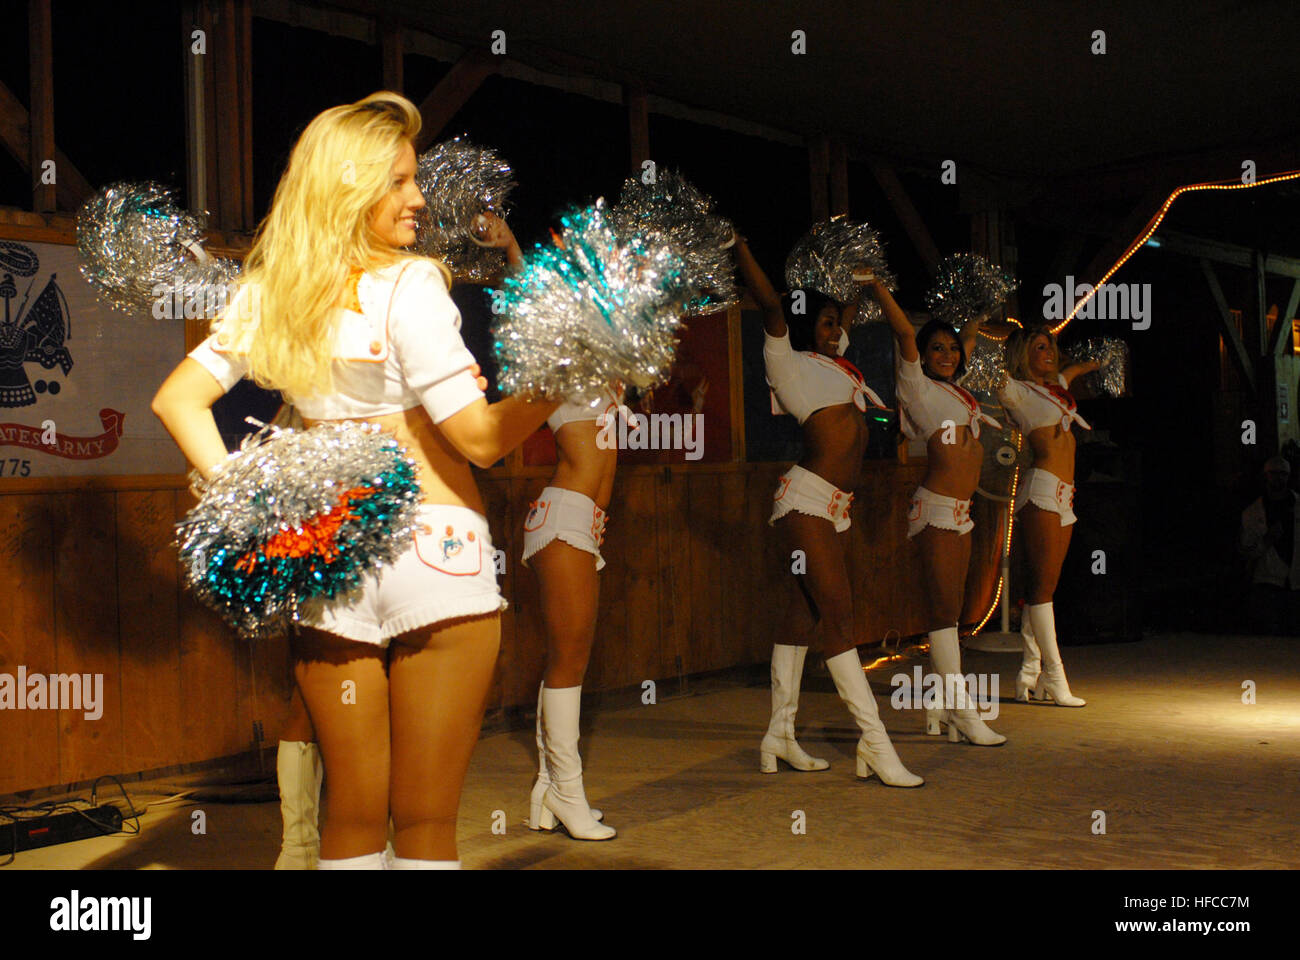 Miami Dolphins' cheerleaders entertained Soldiers, Sailors, Marines and Airmen on a tour of the area. They performed a few dance routines and signed autographs for the troops. Miami Dolphins' Cheerleaders 76734 Stock Photo